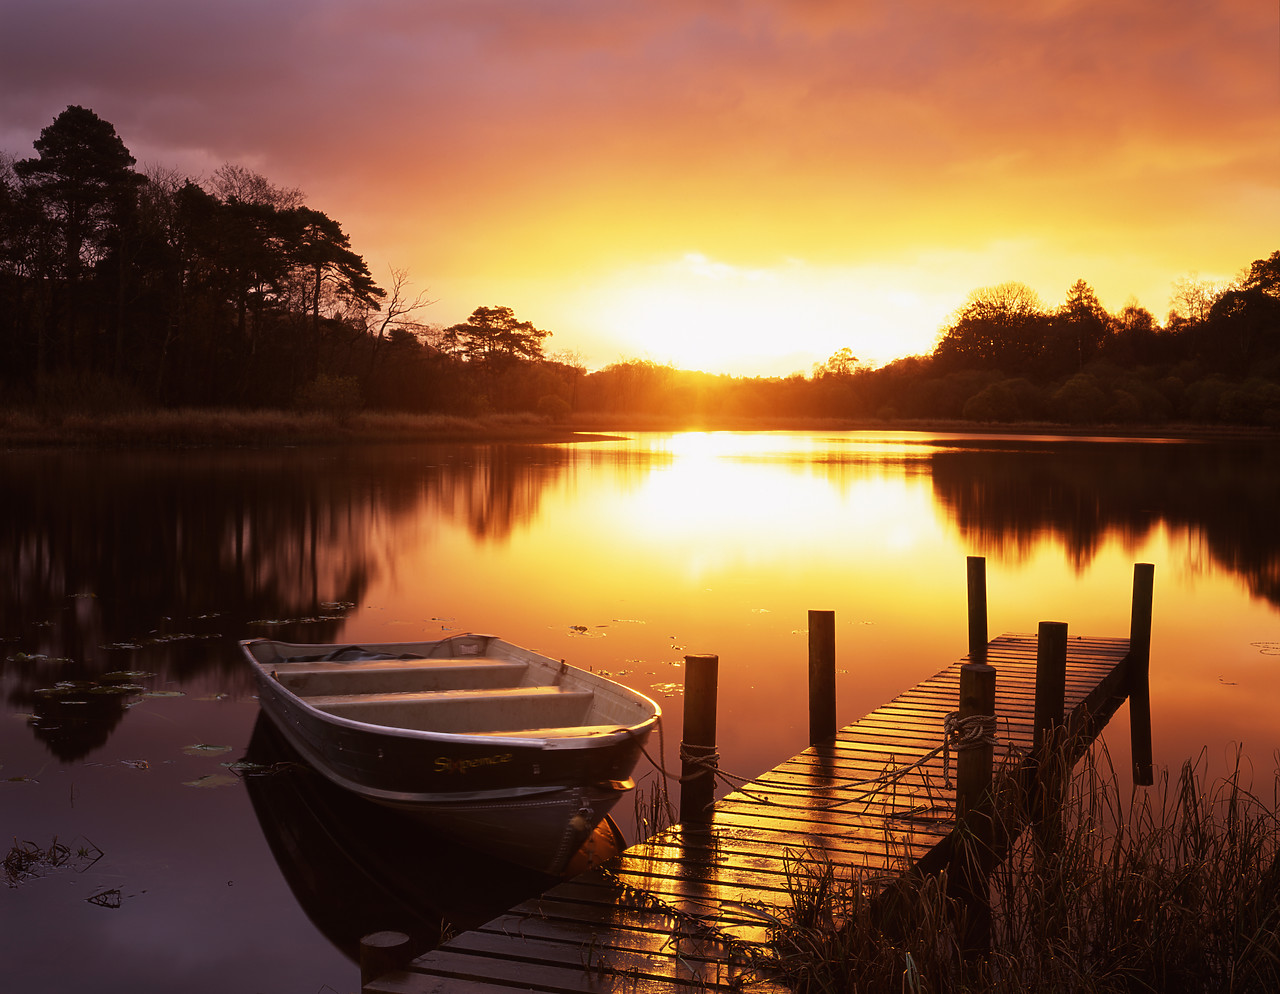 #040262-1 - Boat & Jetty at Sunrise, Elterwater, Lake District National Park, Cumbria, England